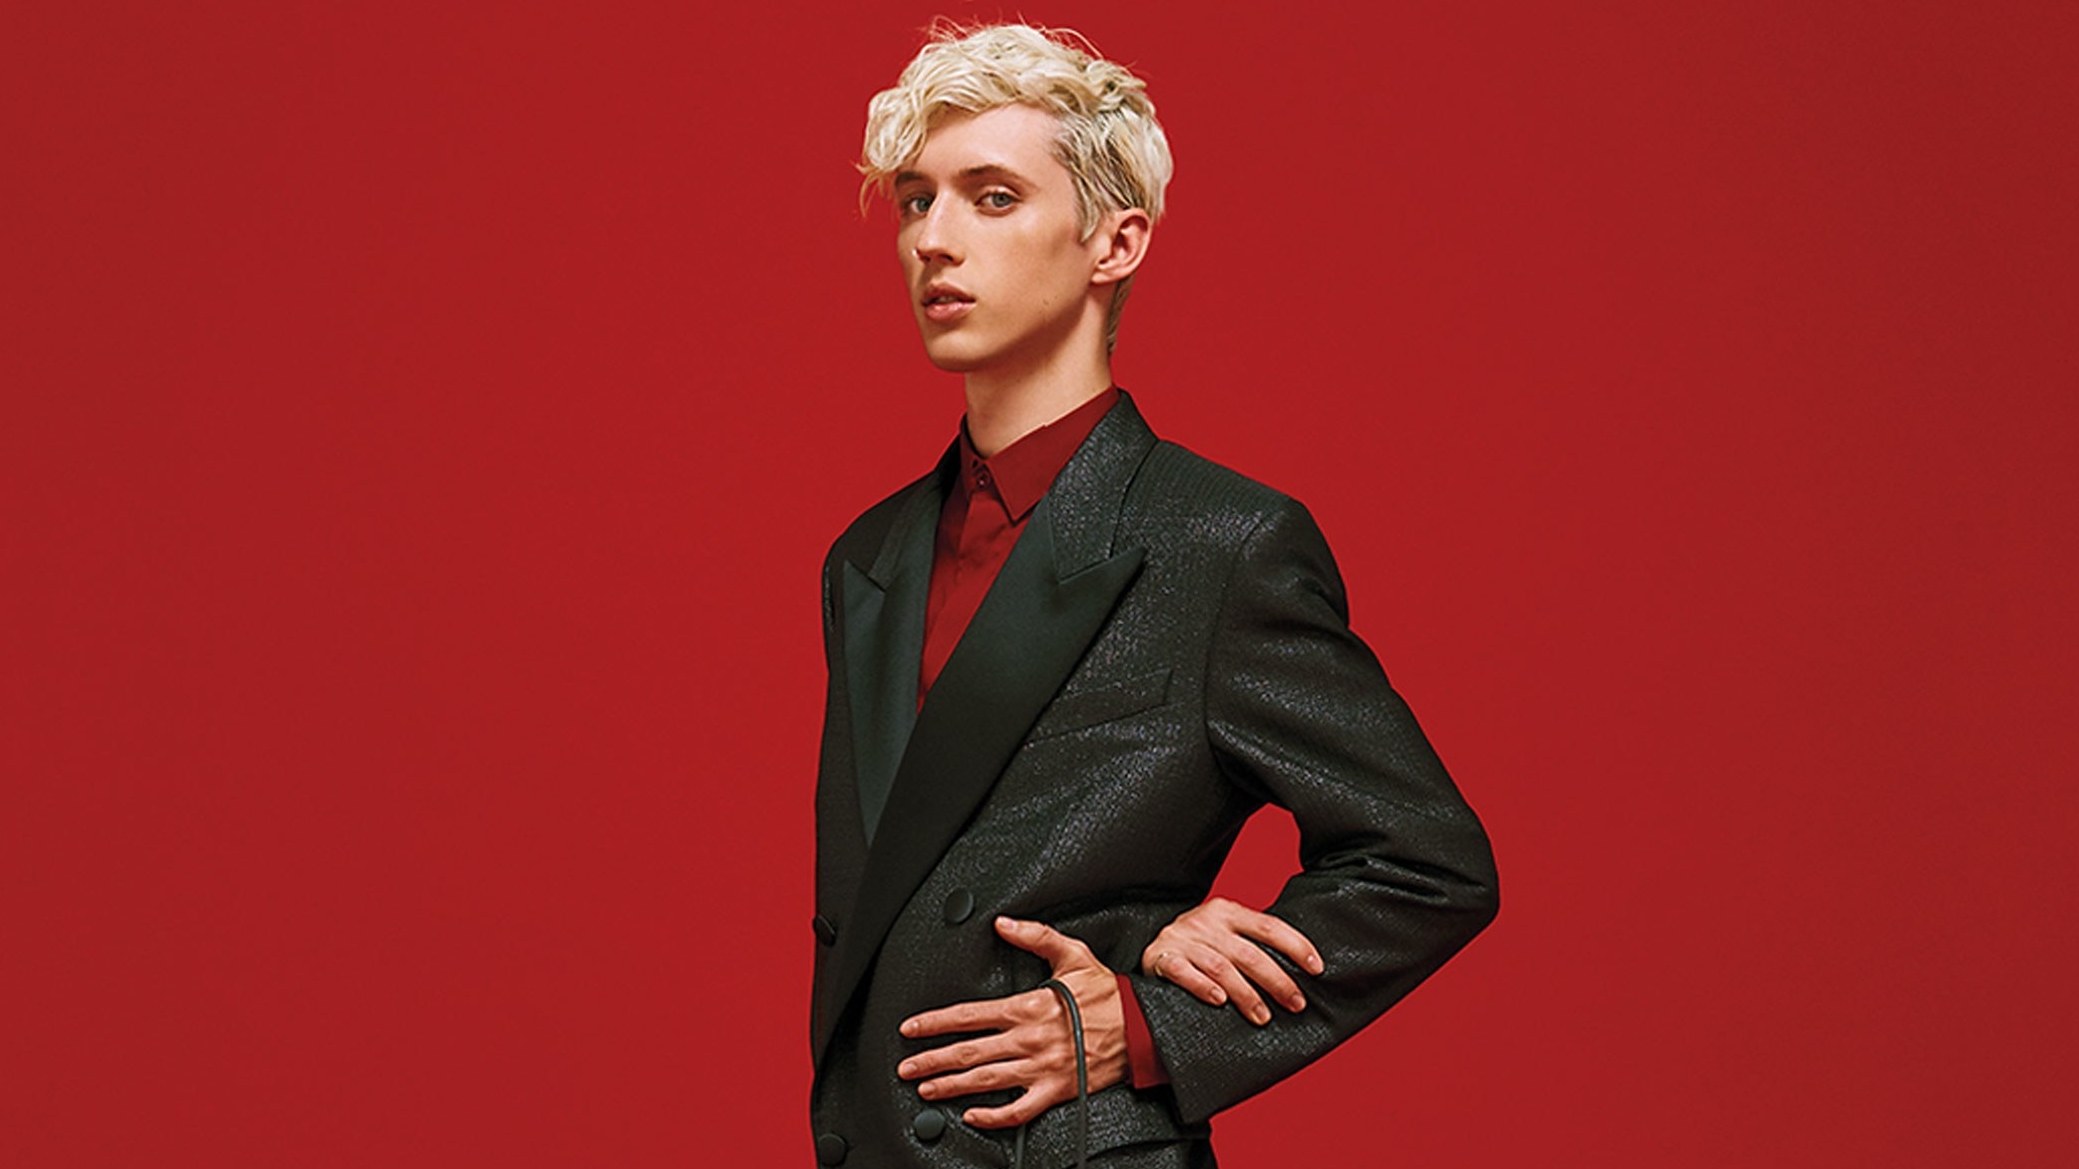 Who Is Troye Sivan? Know About His Age, Height, Net Worth, Measurements, Personal Life, & Relationship